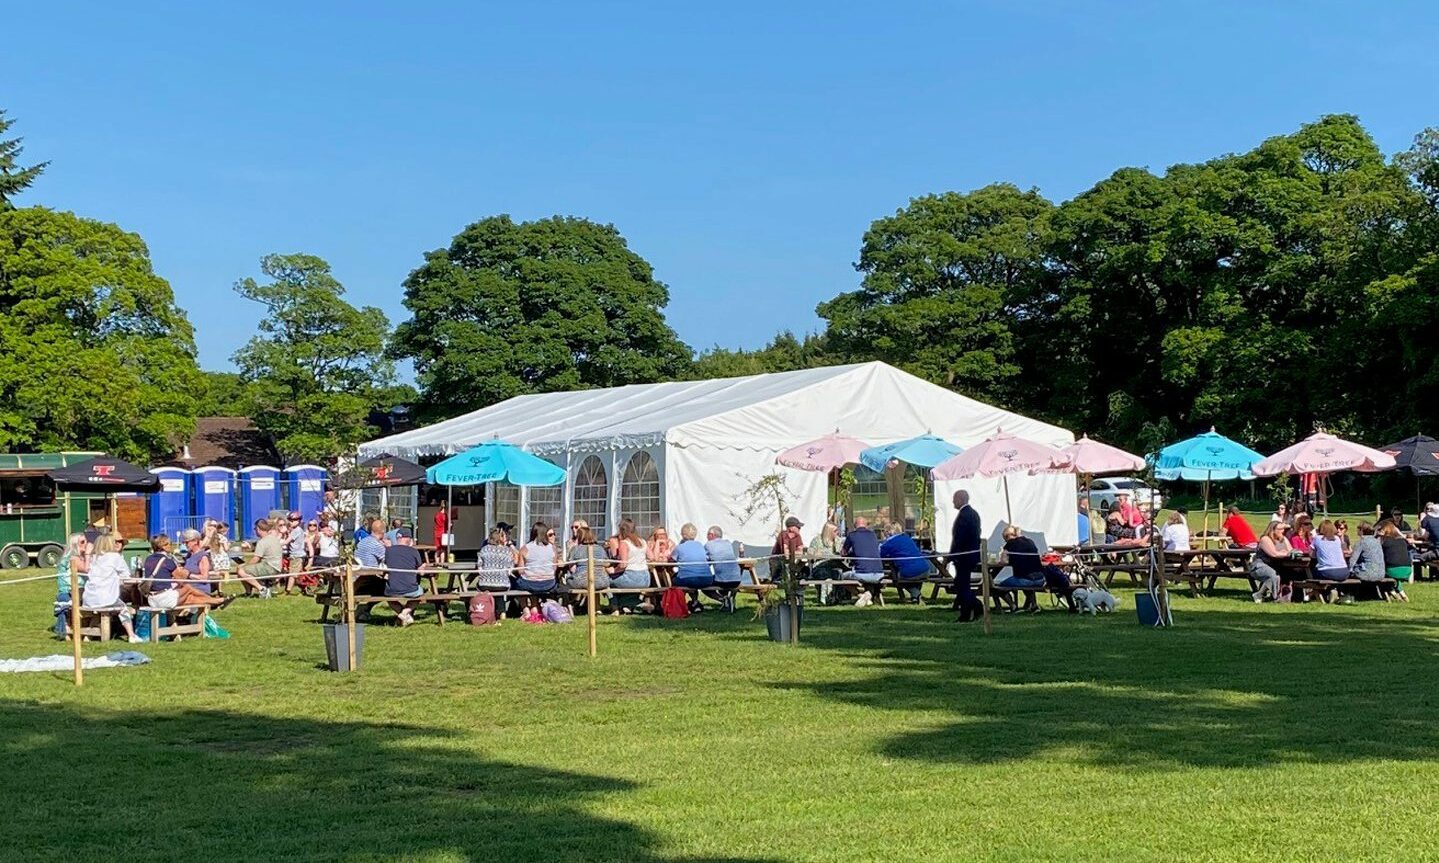 Kinross Beer Garden has been a big hit since opening in July 2020. Image: